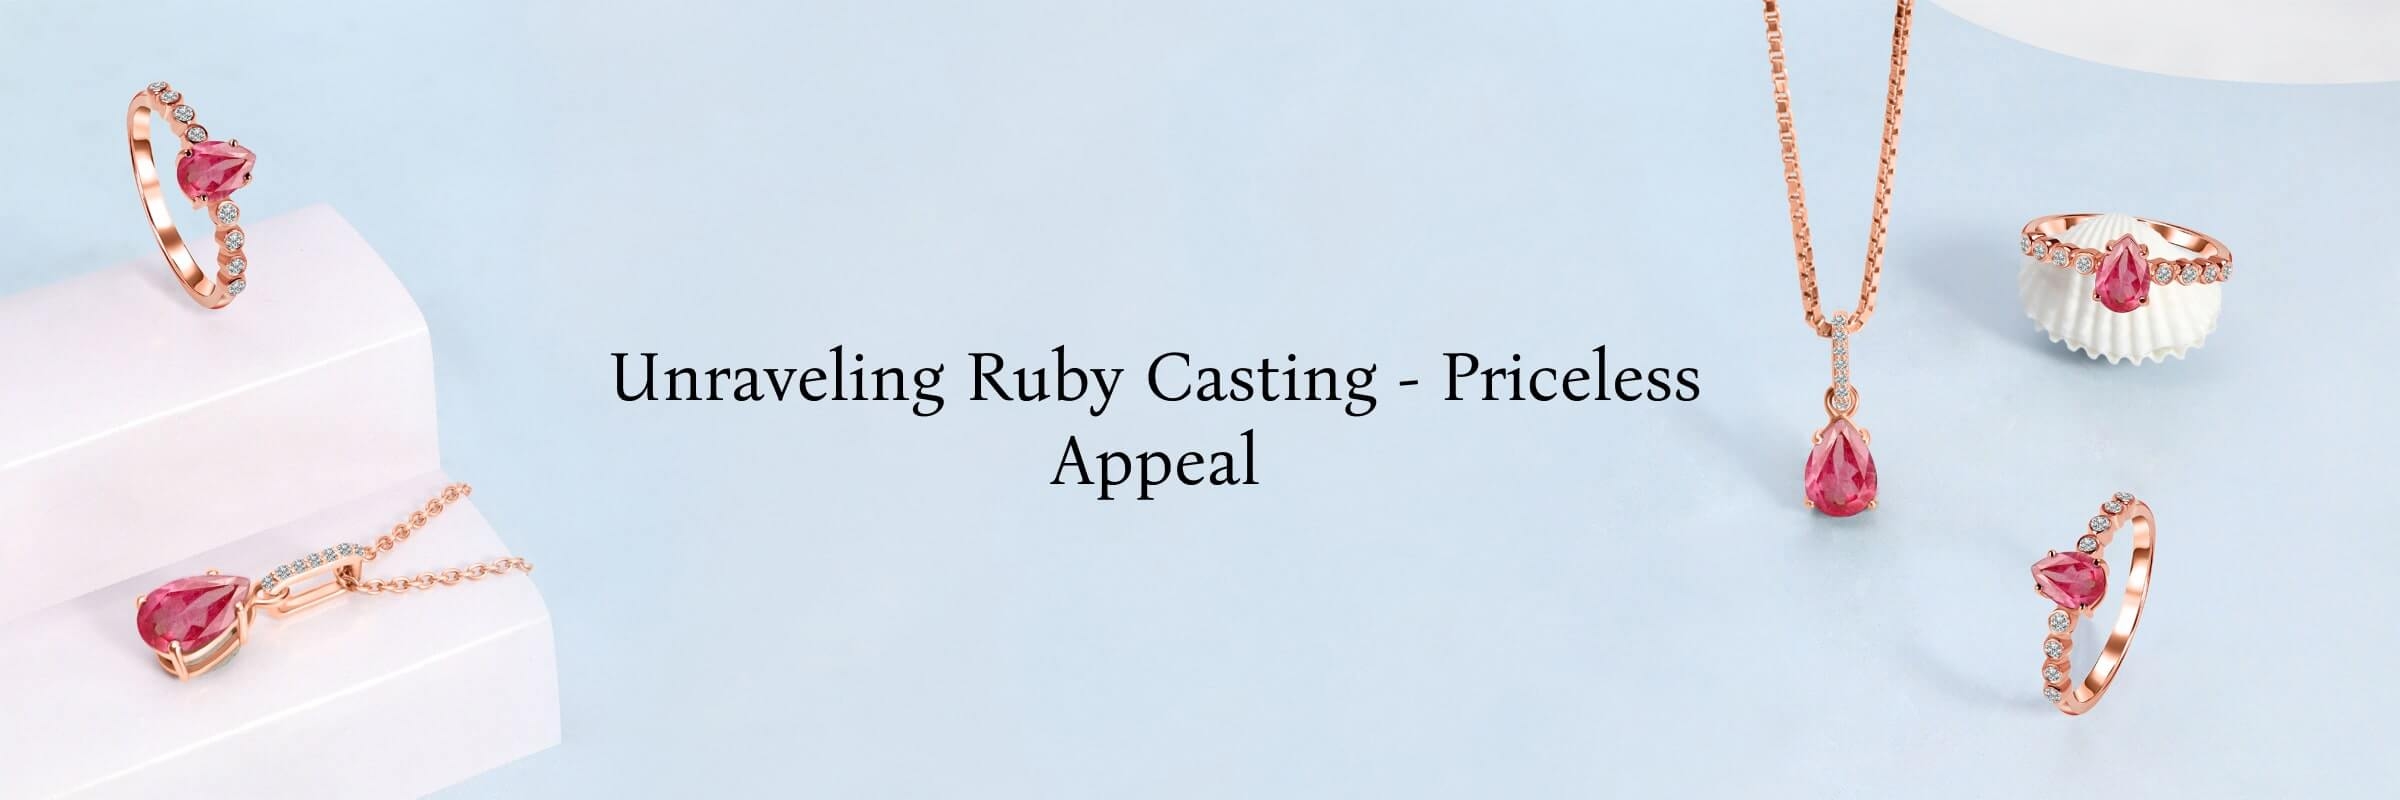 Cost and Value of Ruby Casting Jewelry Collection